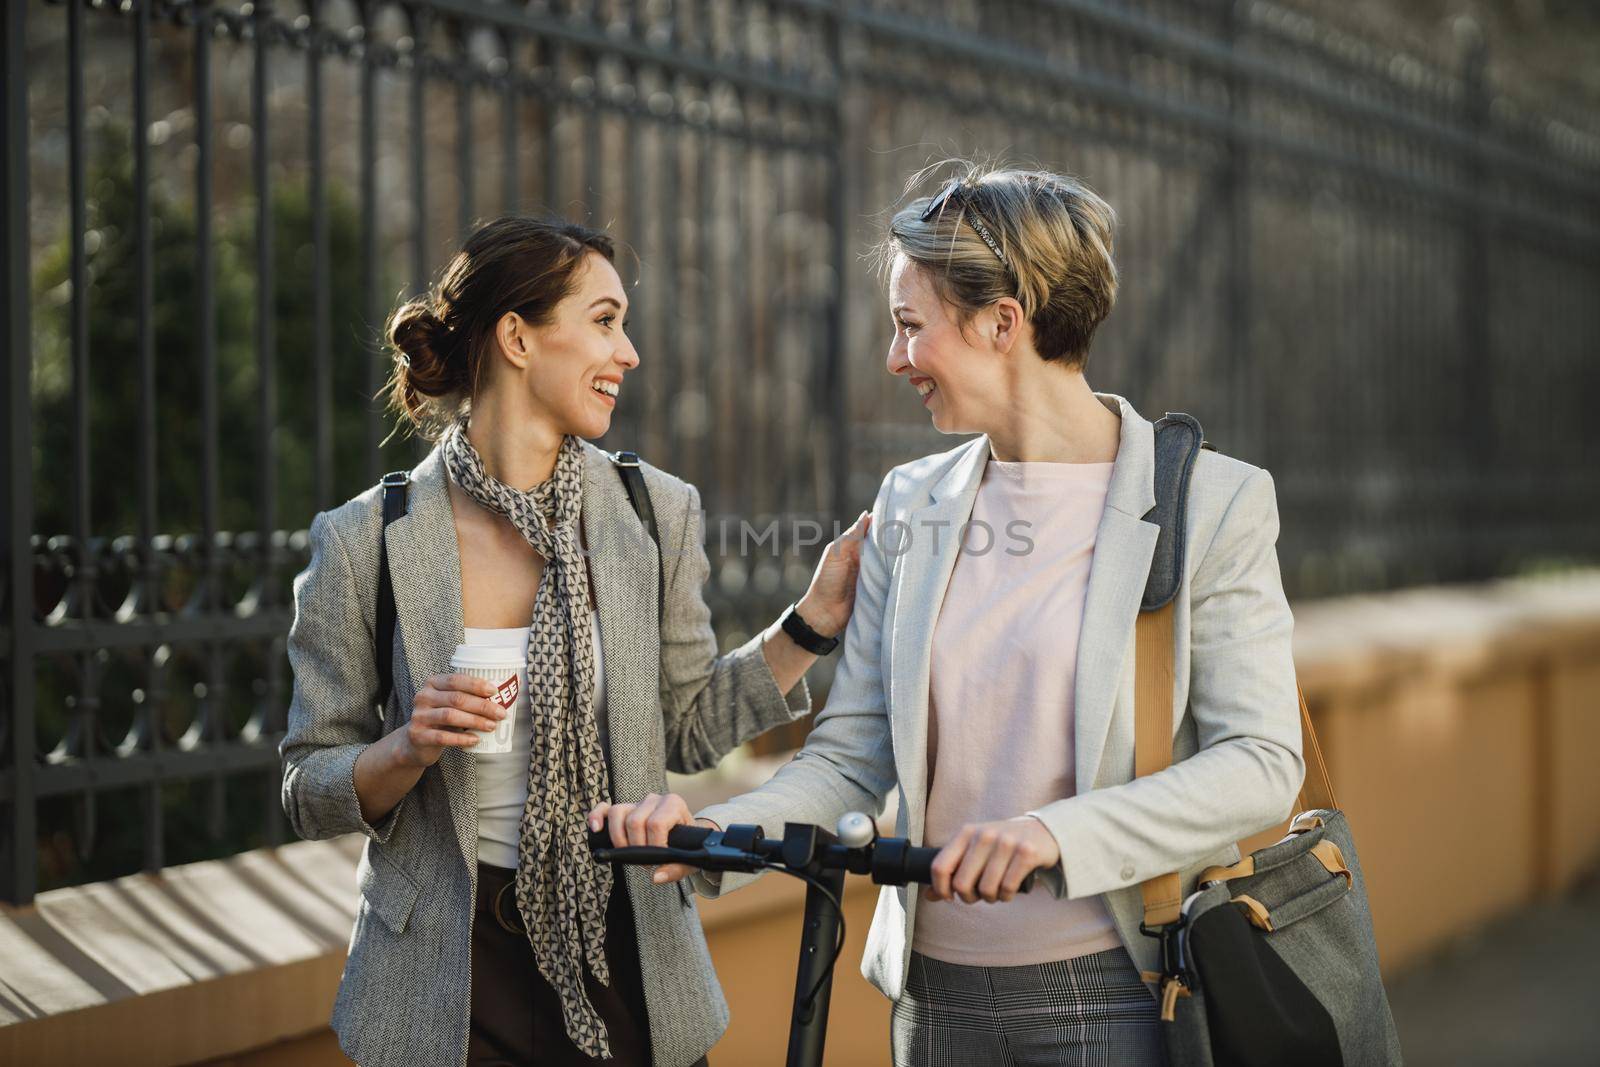 A two successful businesswomen having a quick coffee break and chatting while walking through the city.